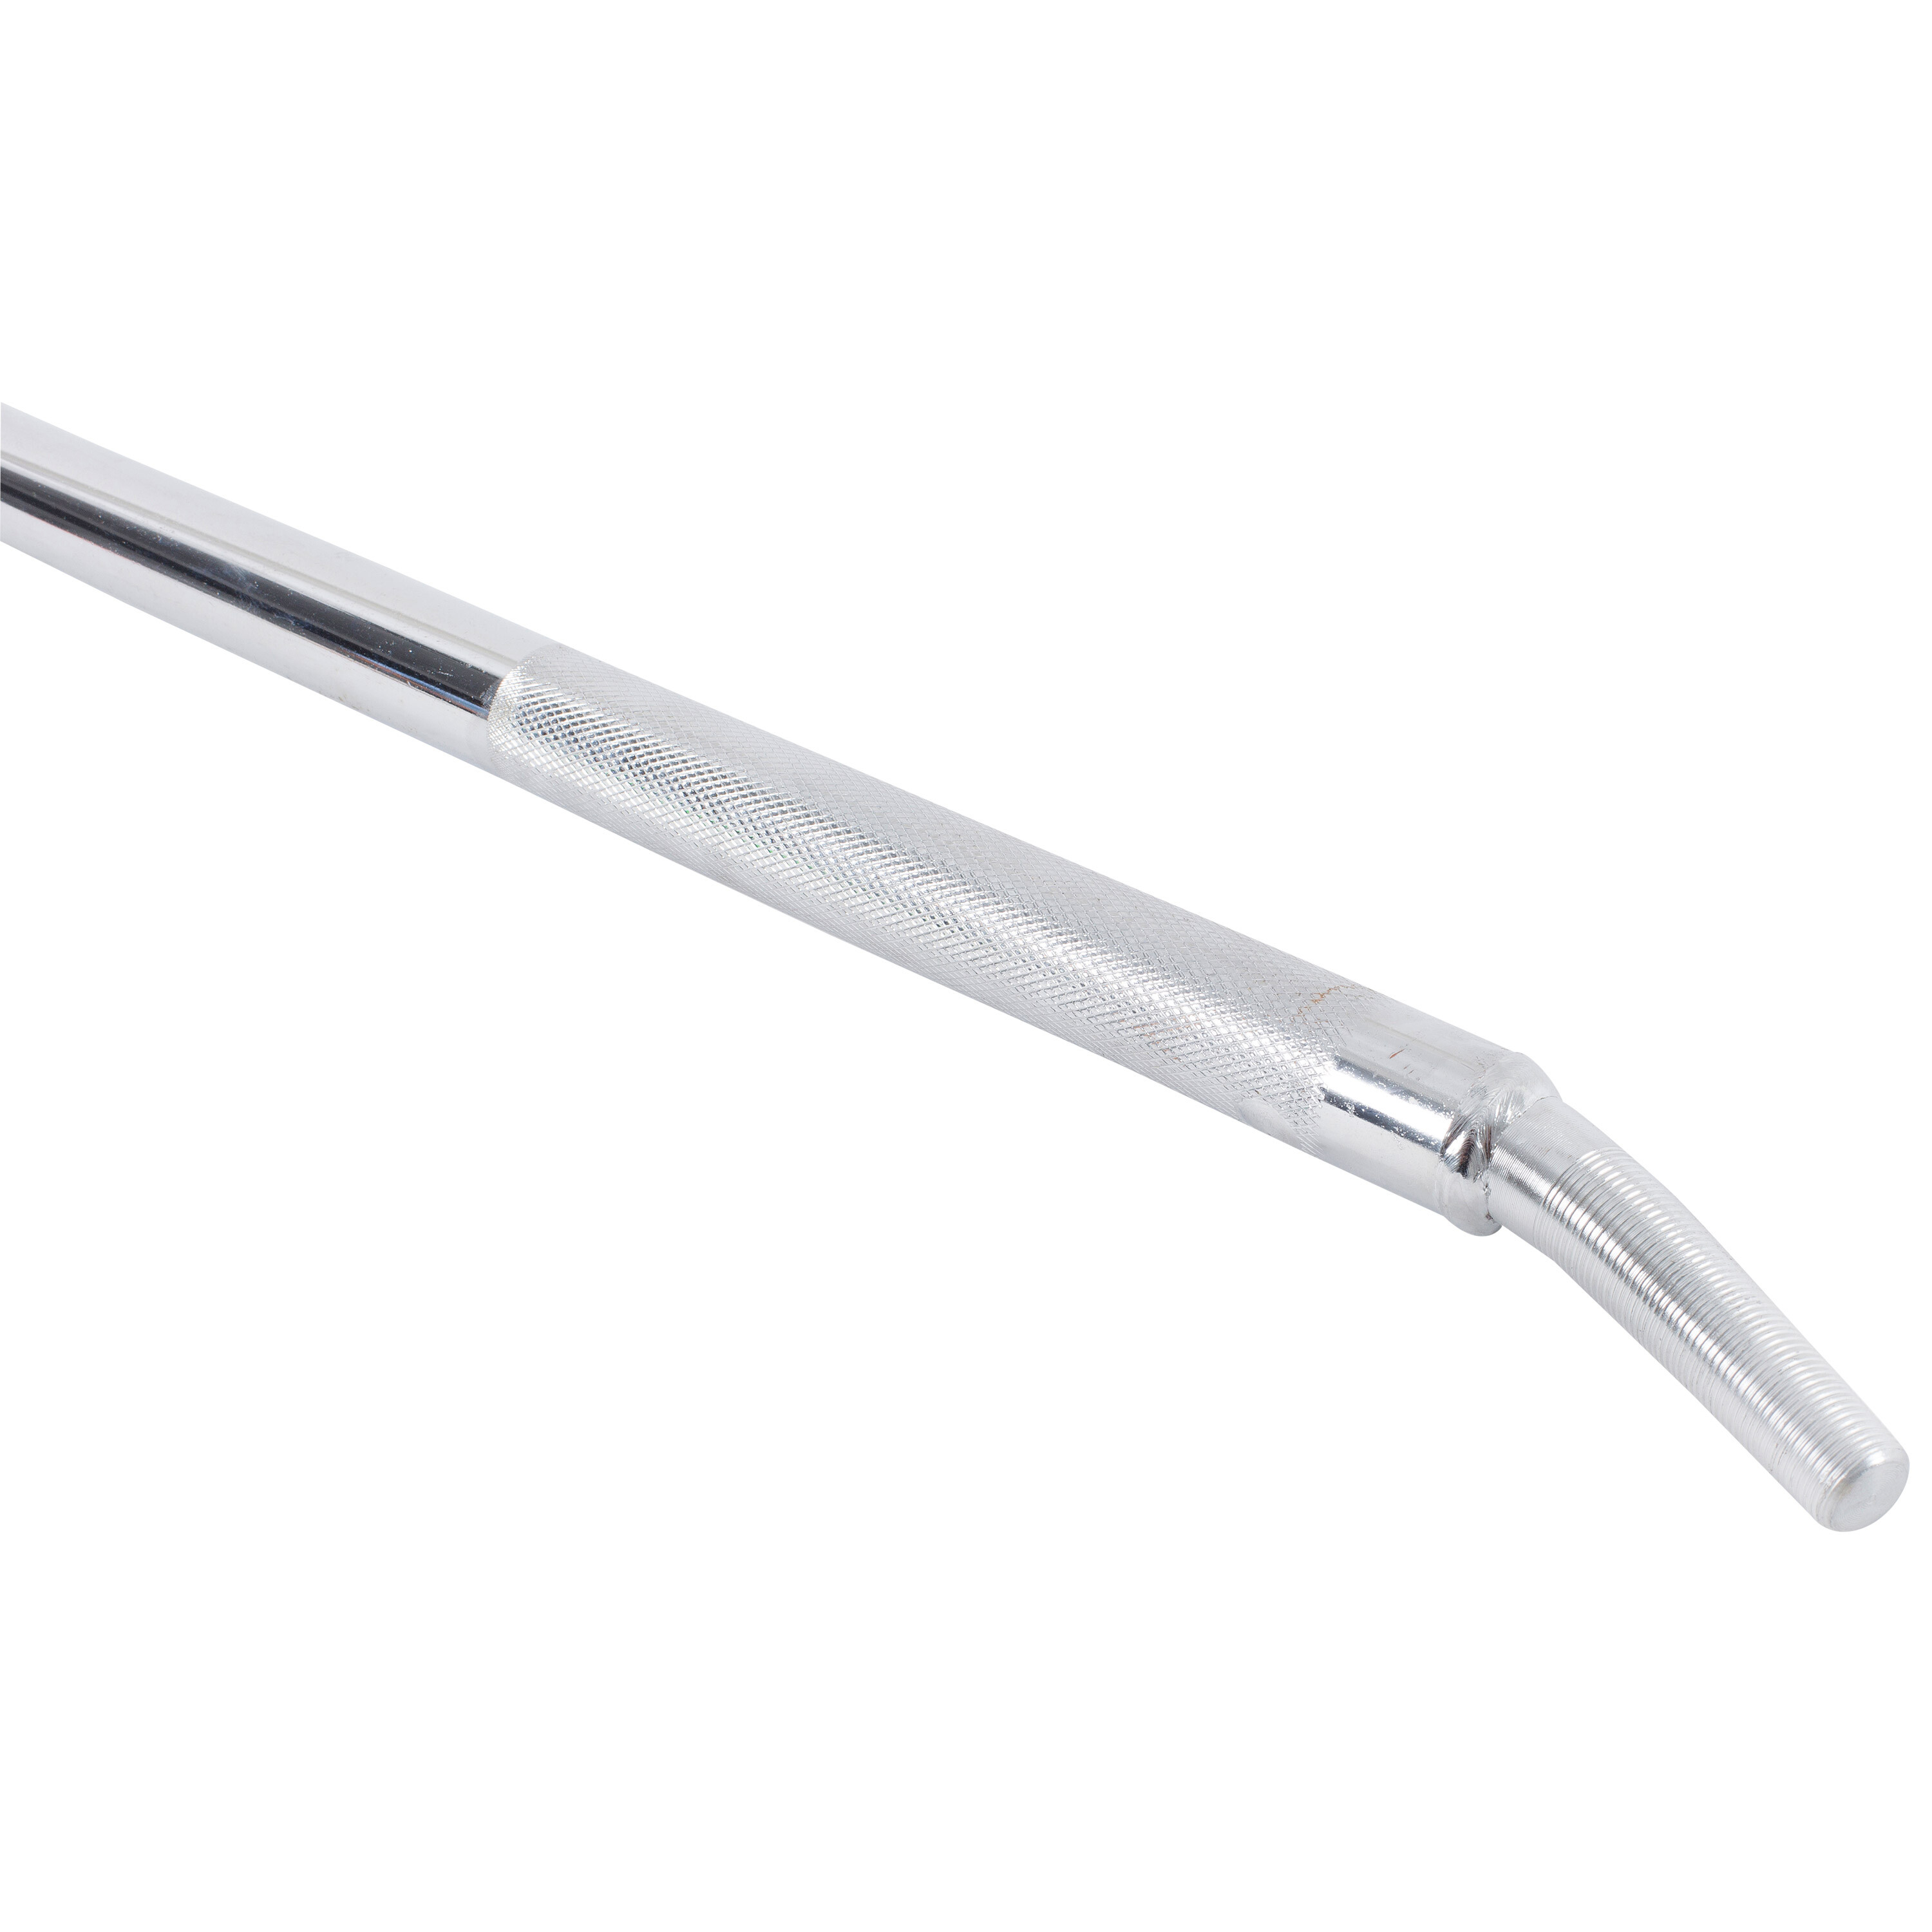 Keeper 04935-36" Chrome Winch Bar for sale online 